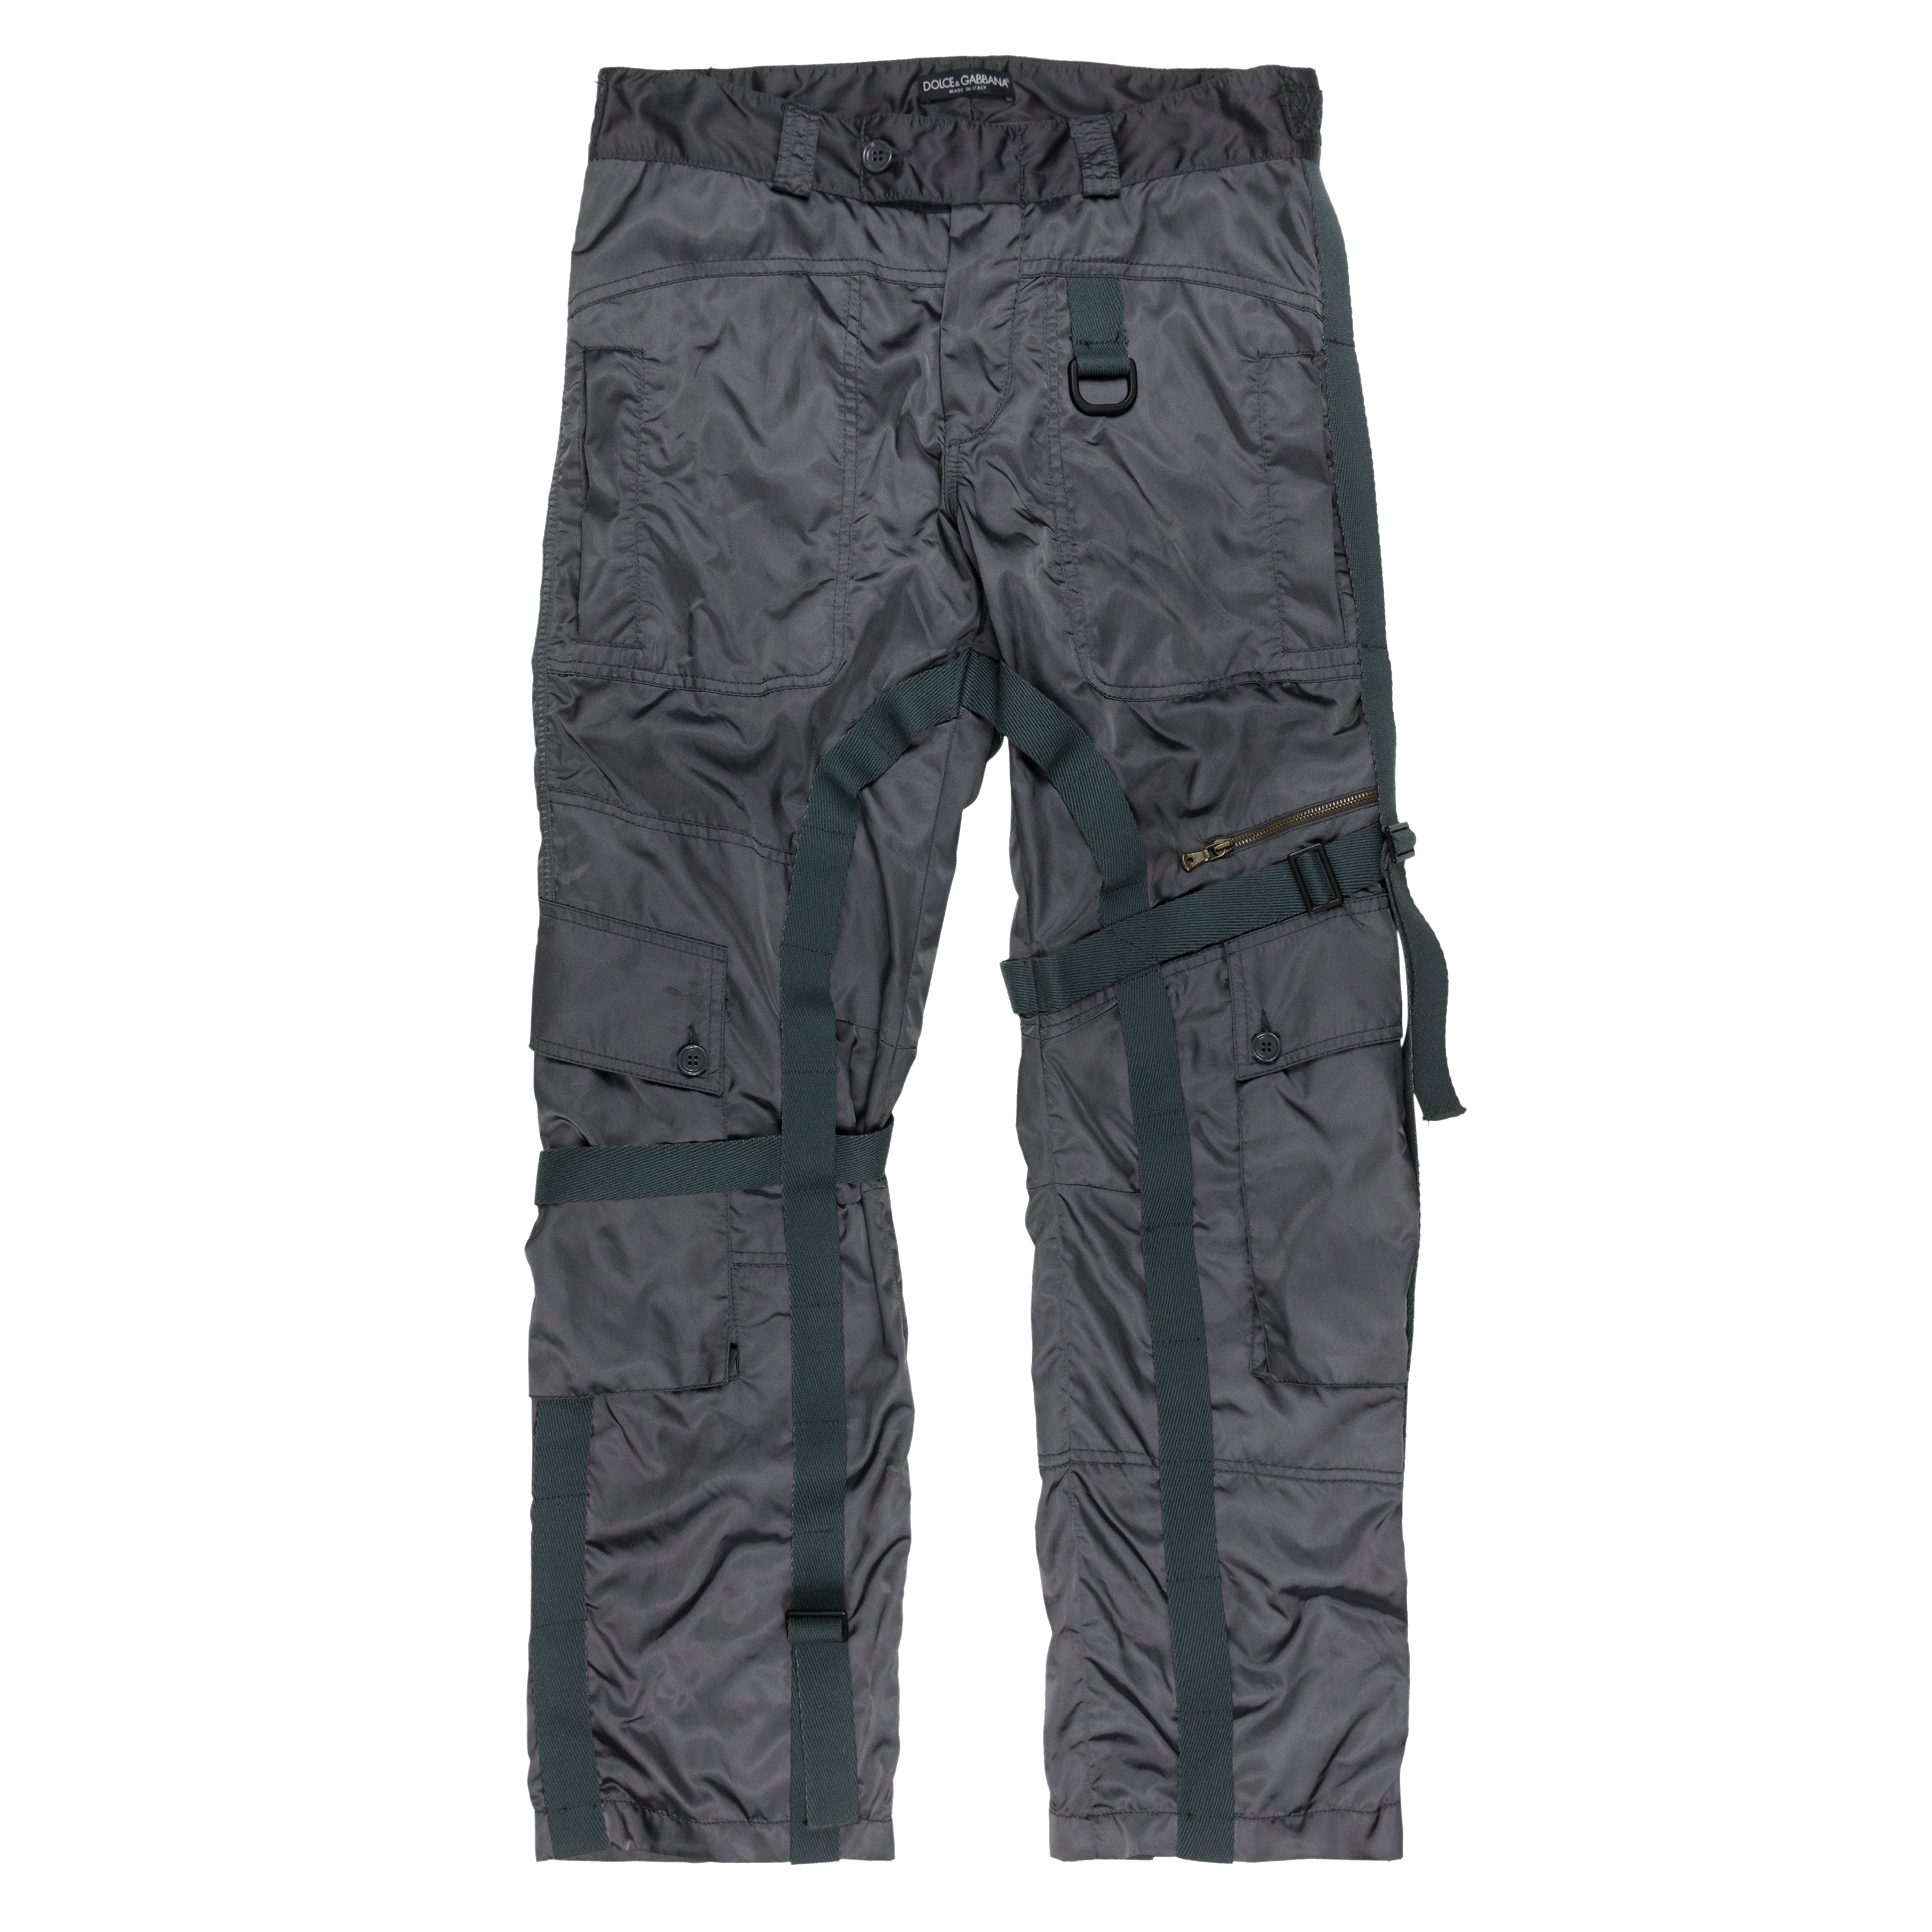 dolce and gabbana cargo pants